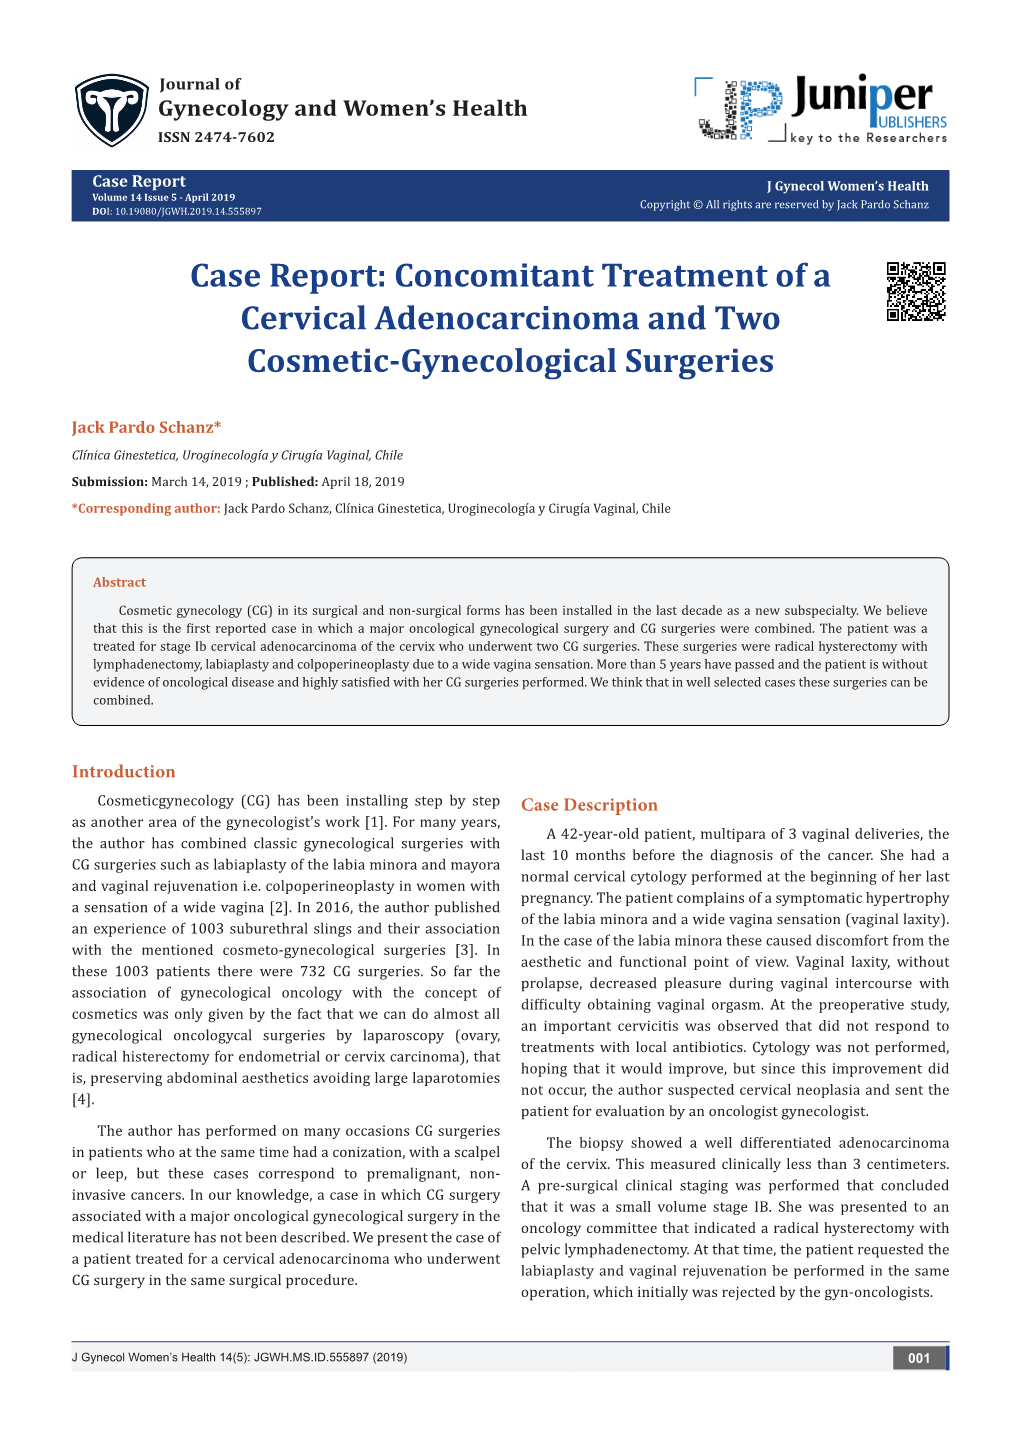 Concomitant Treatment of a Cervical Adenocarcinoma and Two Cosmetic-Gynecological Surgeries